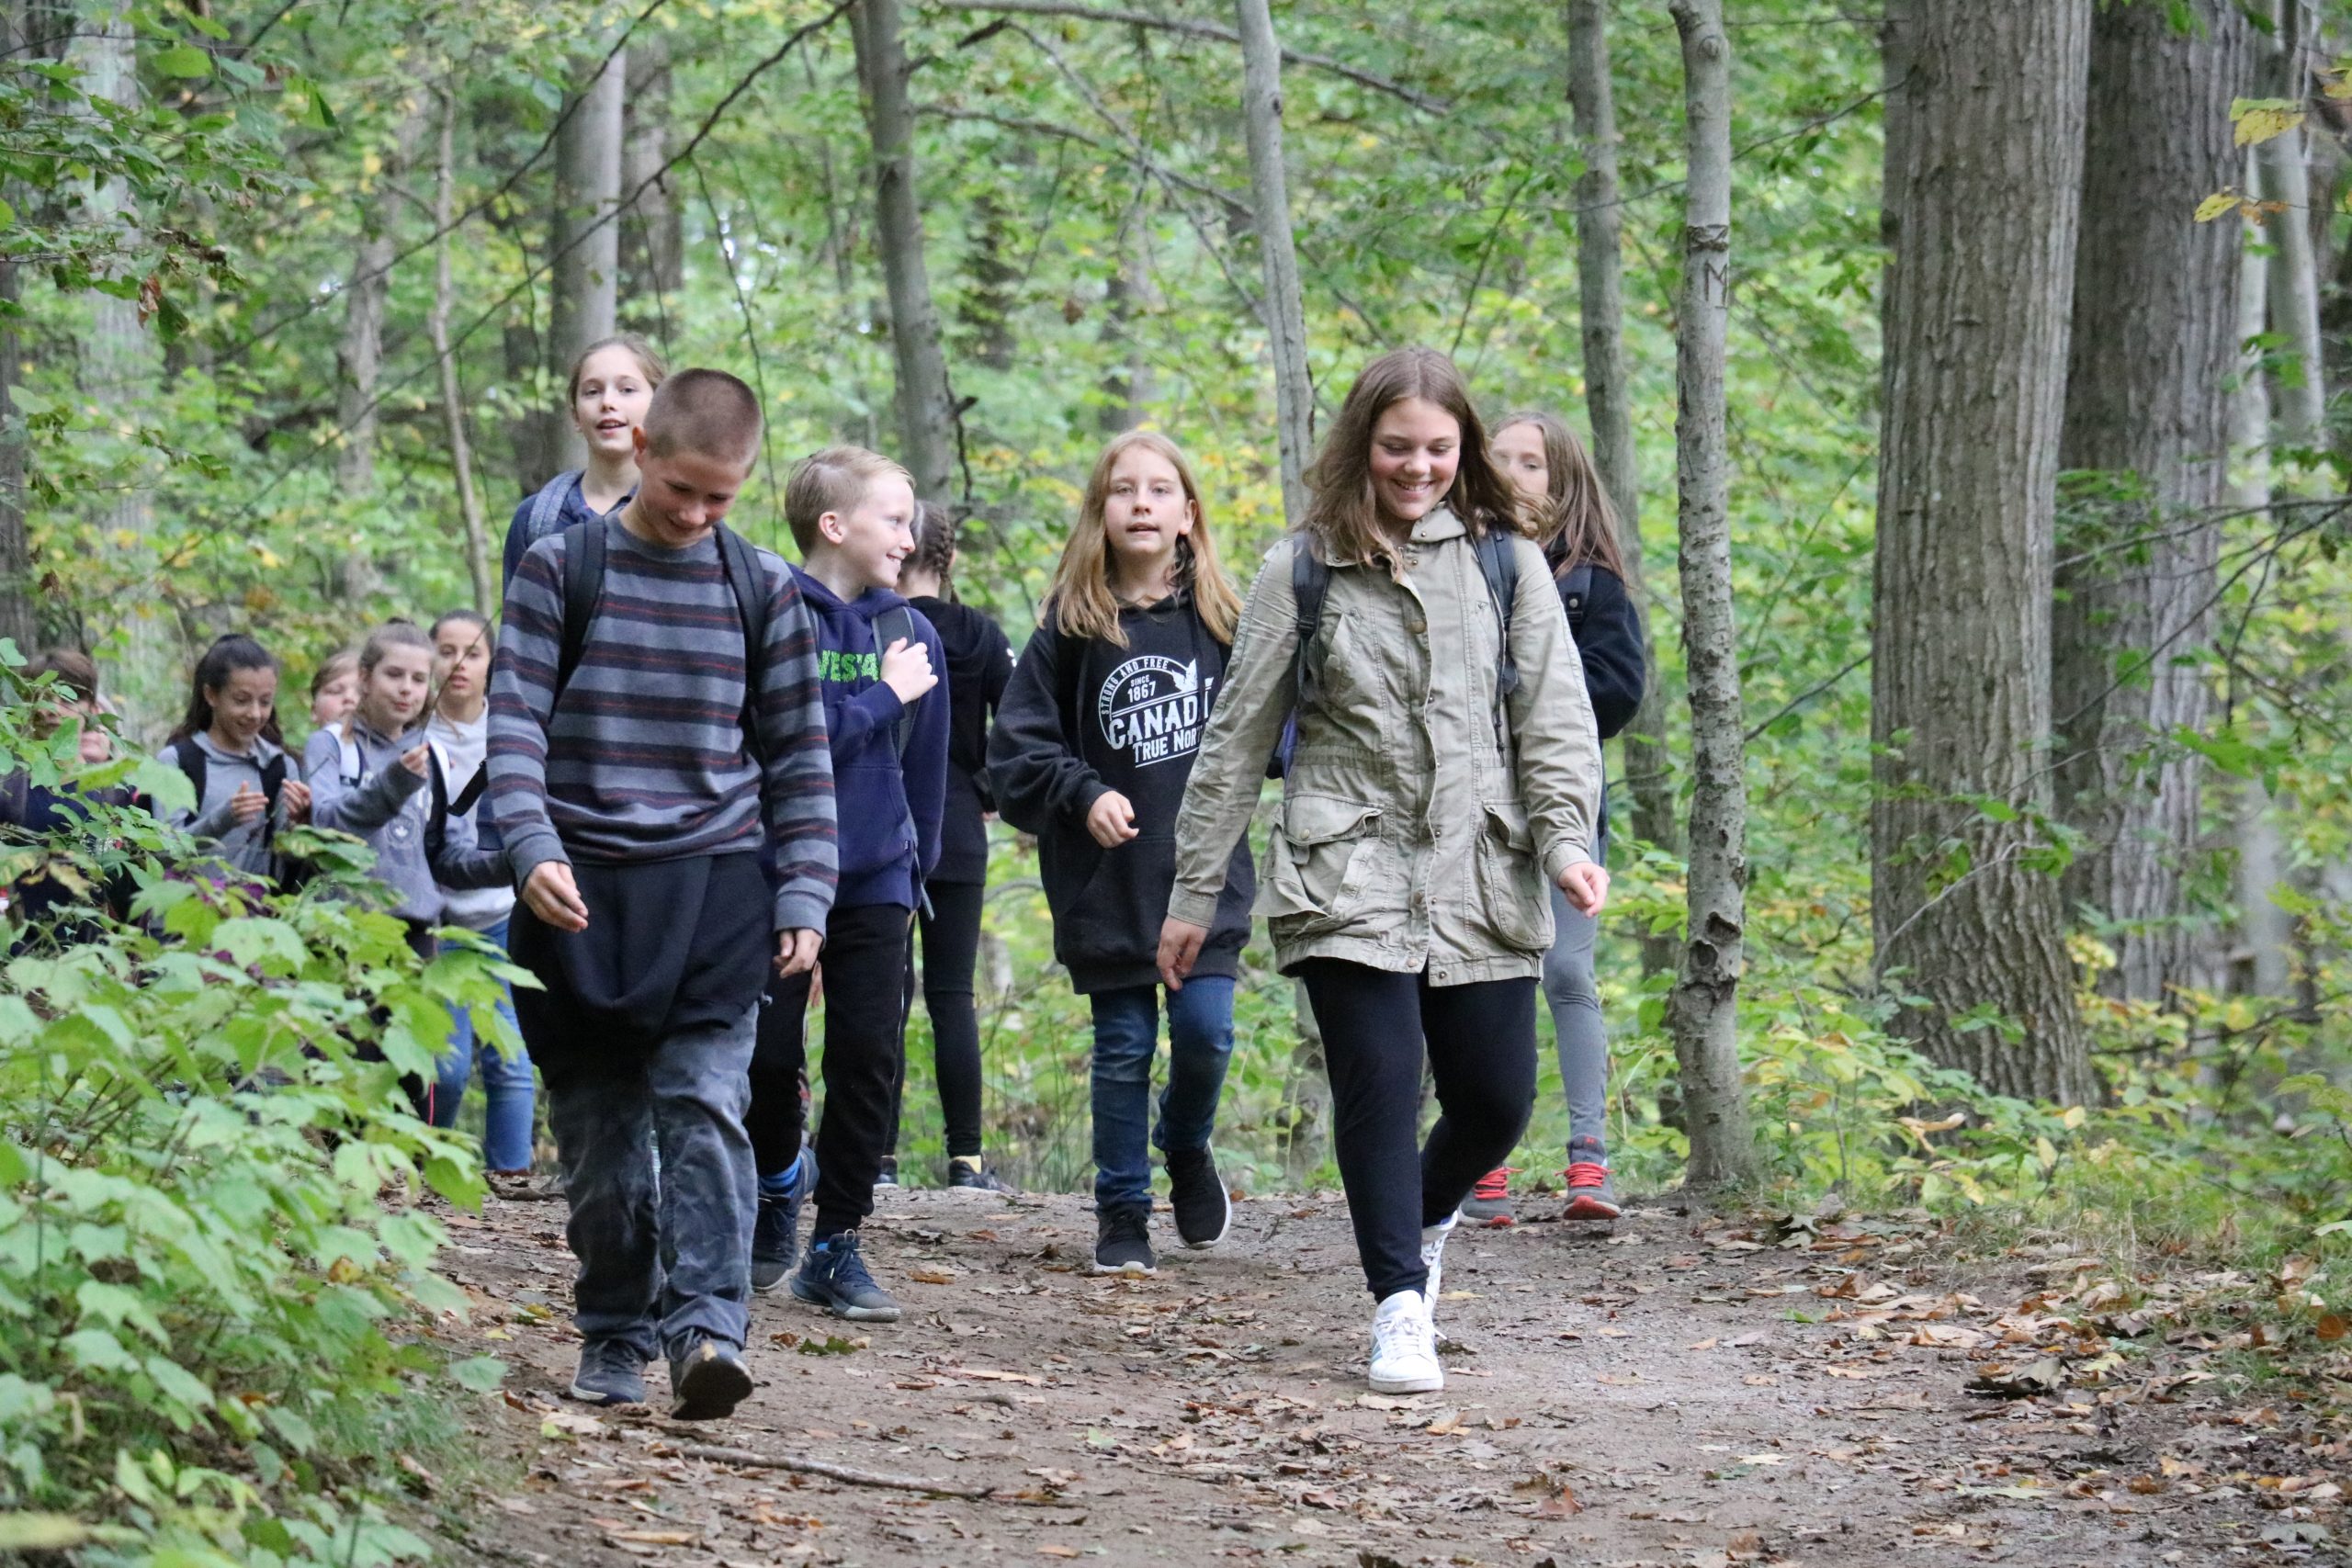 Students Walking Through the Forest at the Carolinian Forest Festival